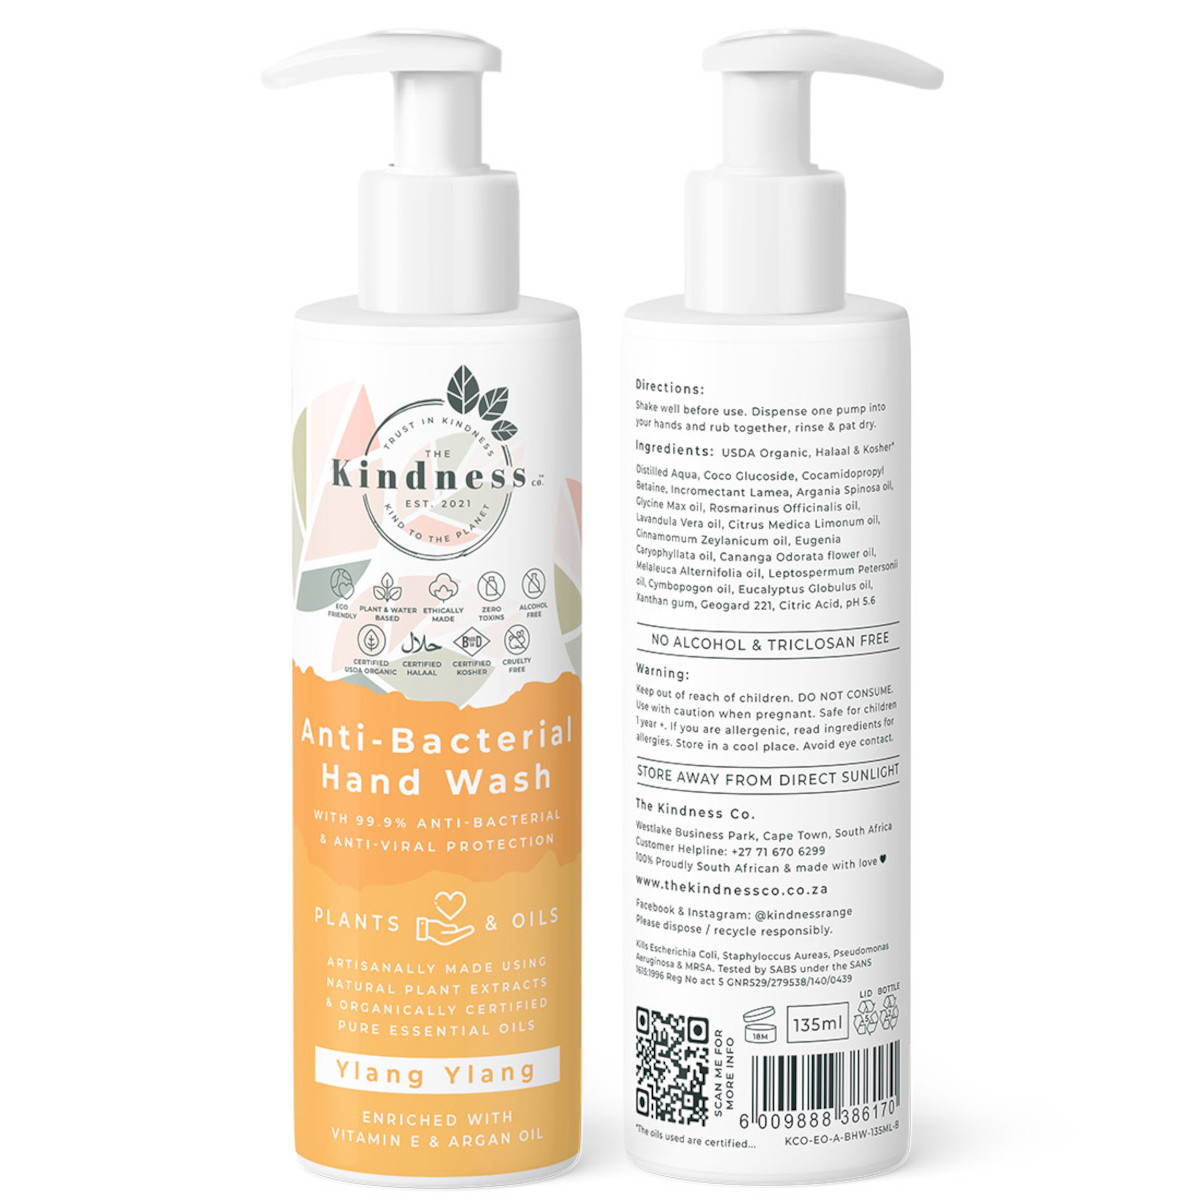 The Kindness Anti Bacterial Hand Wash